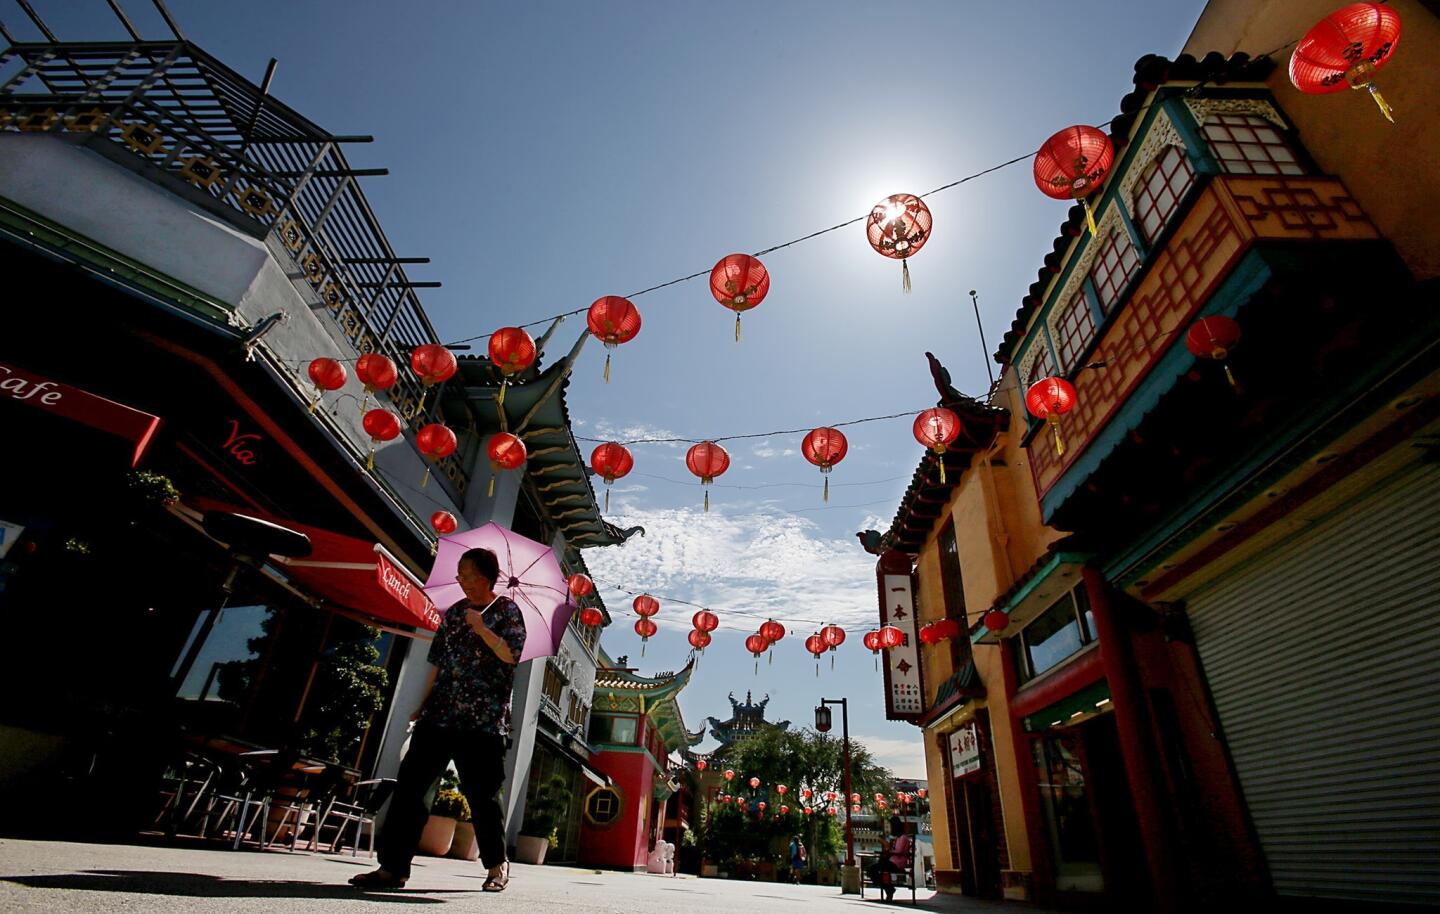 A woman uses an umbrella to shield herself from the scorching sun in L.A.'s Old Chinatown, where the mercury quickly soared into the mid-90s Friday morning.